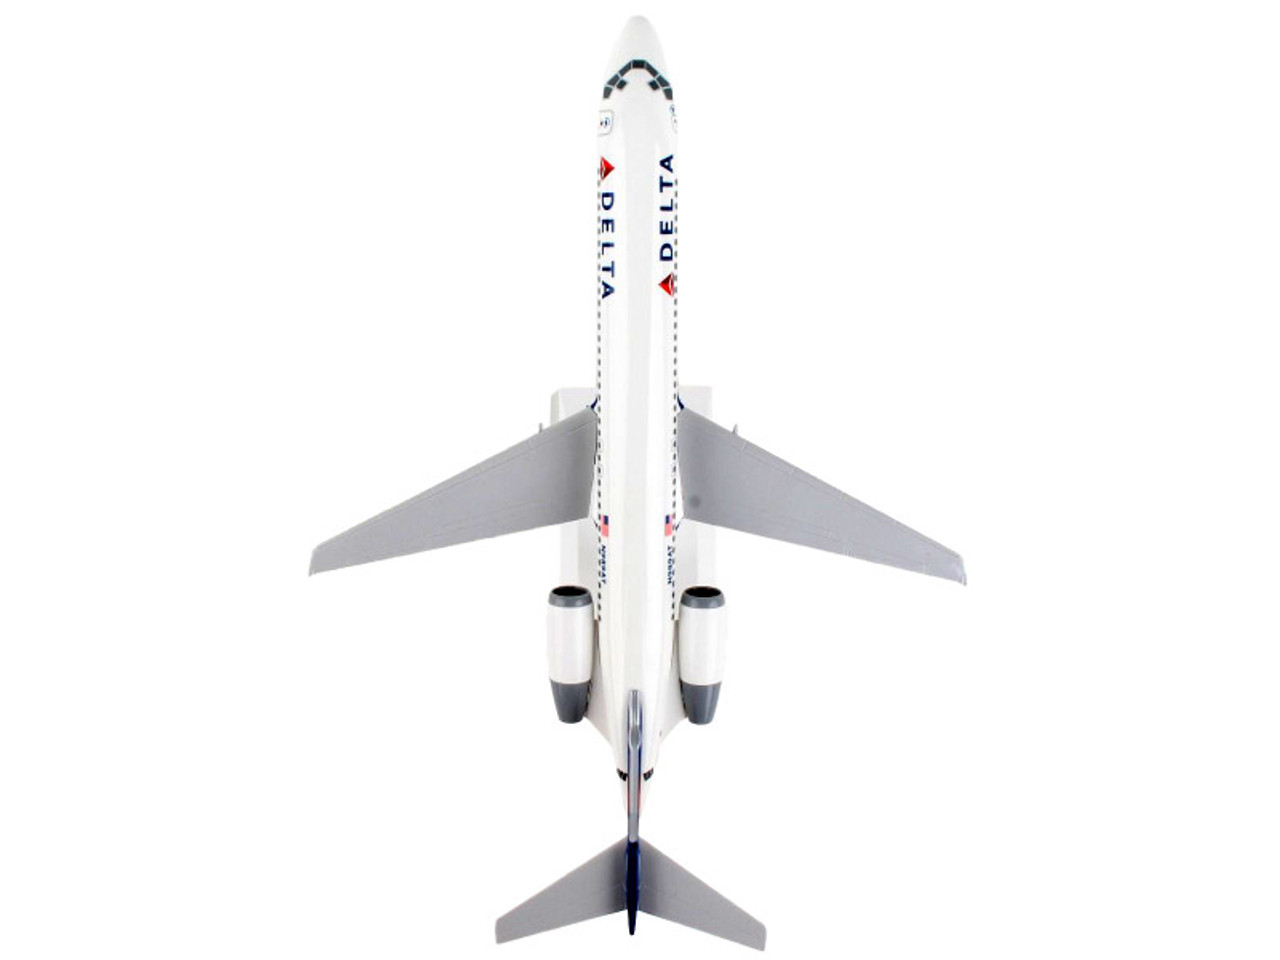 Boeing 717 Commercial Aircraft "Delta Air Lines" (N989AT) White with Blue and Red Tail (Snap-Fit) 1/130 Plastic Model by Skymarks